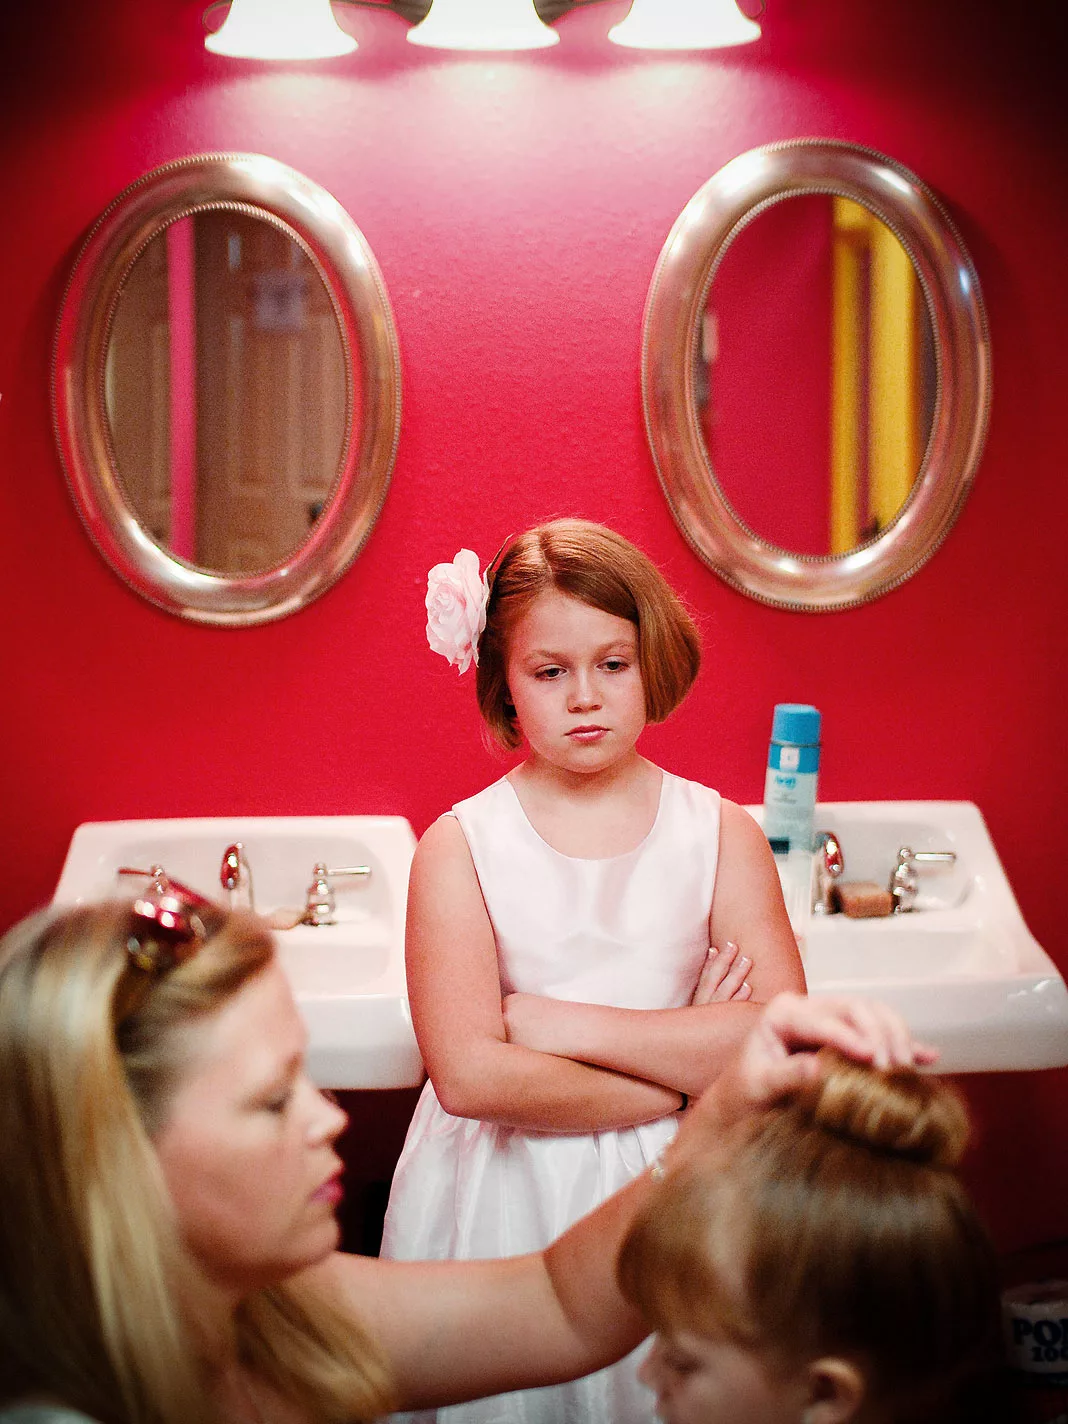 A jealous flower girl stares down her sister in a pink room